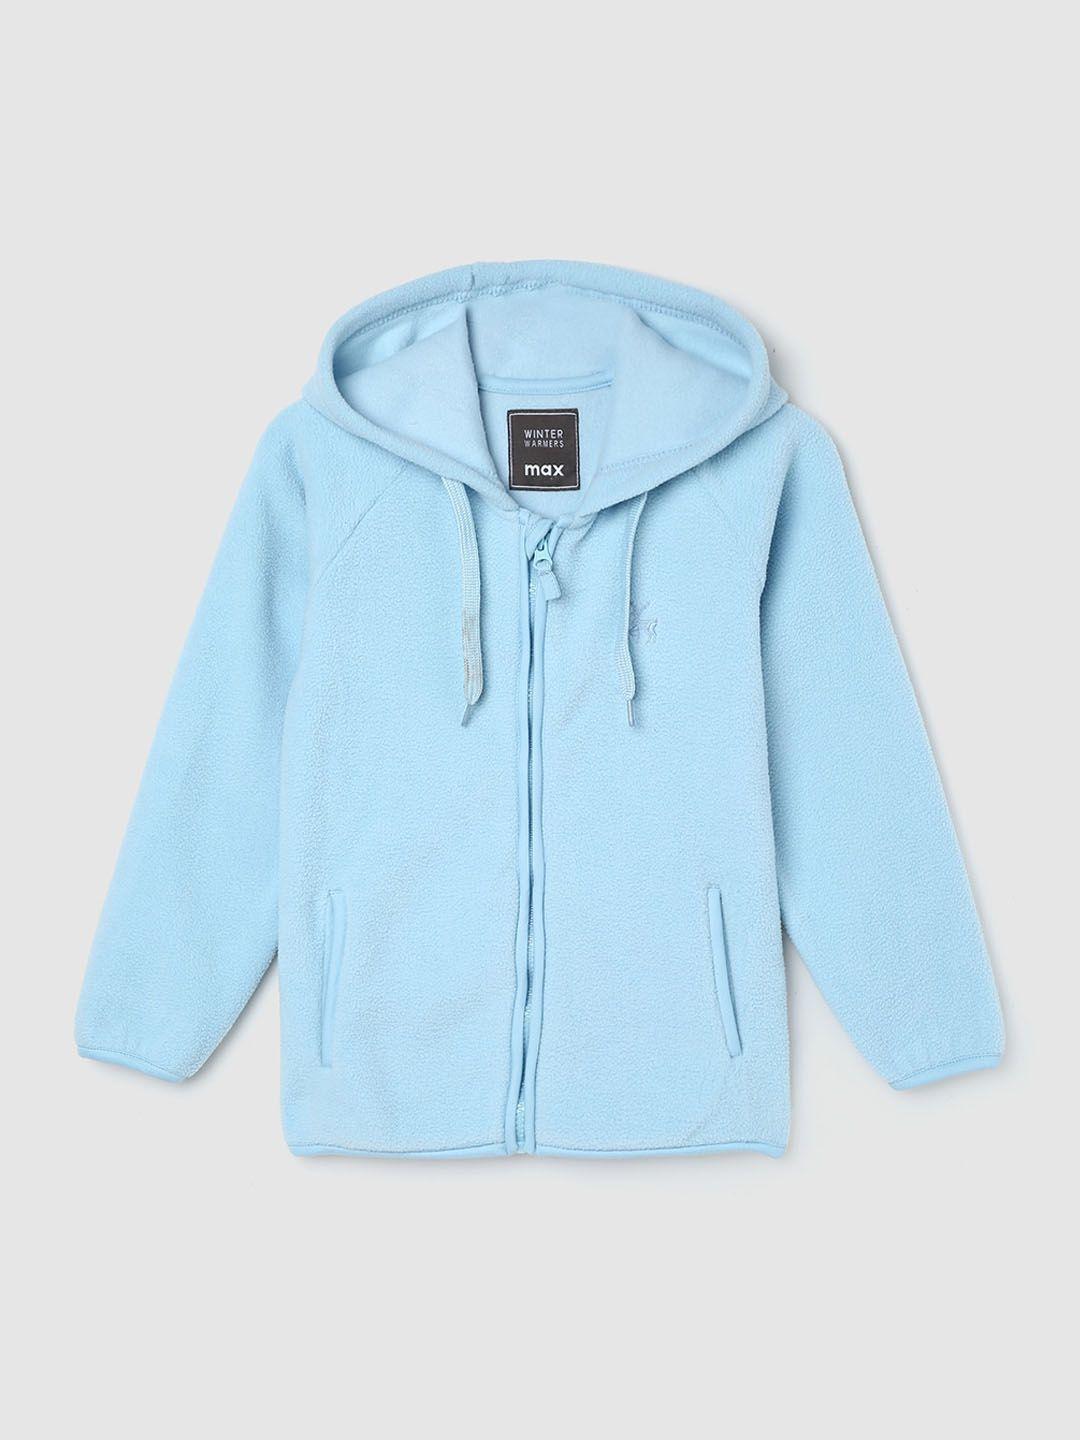 max boys hooded tailored jacket